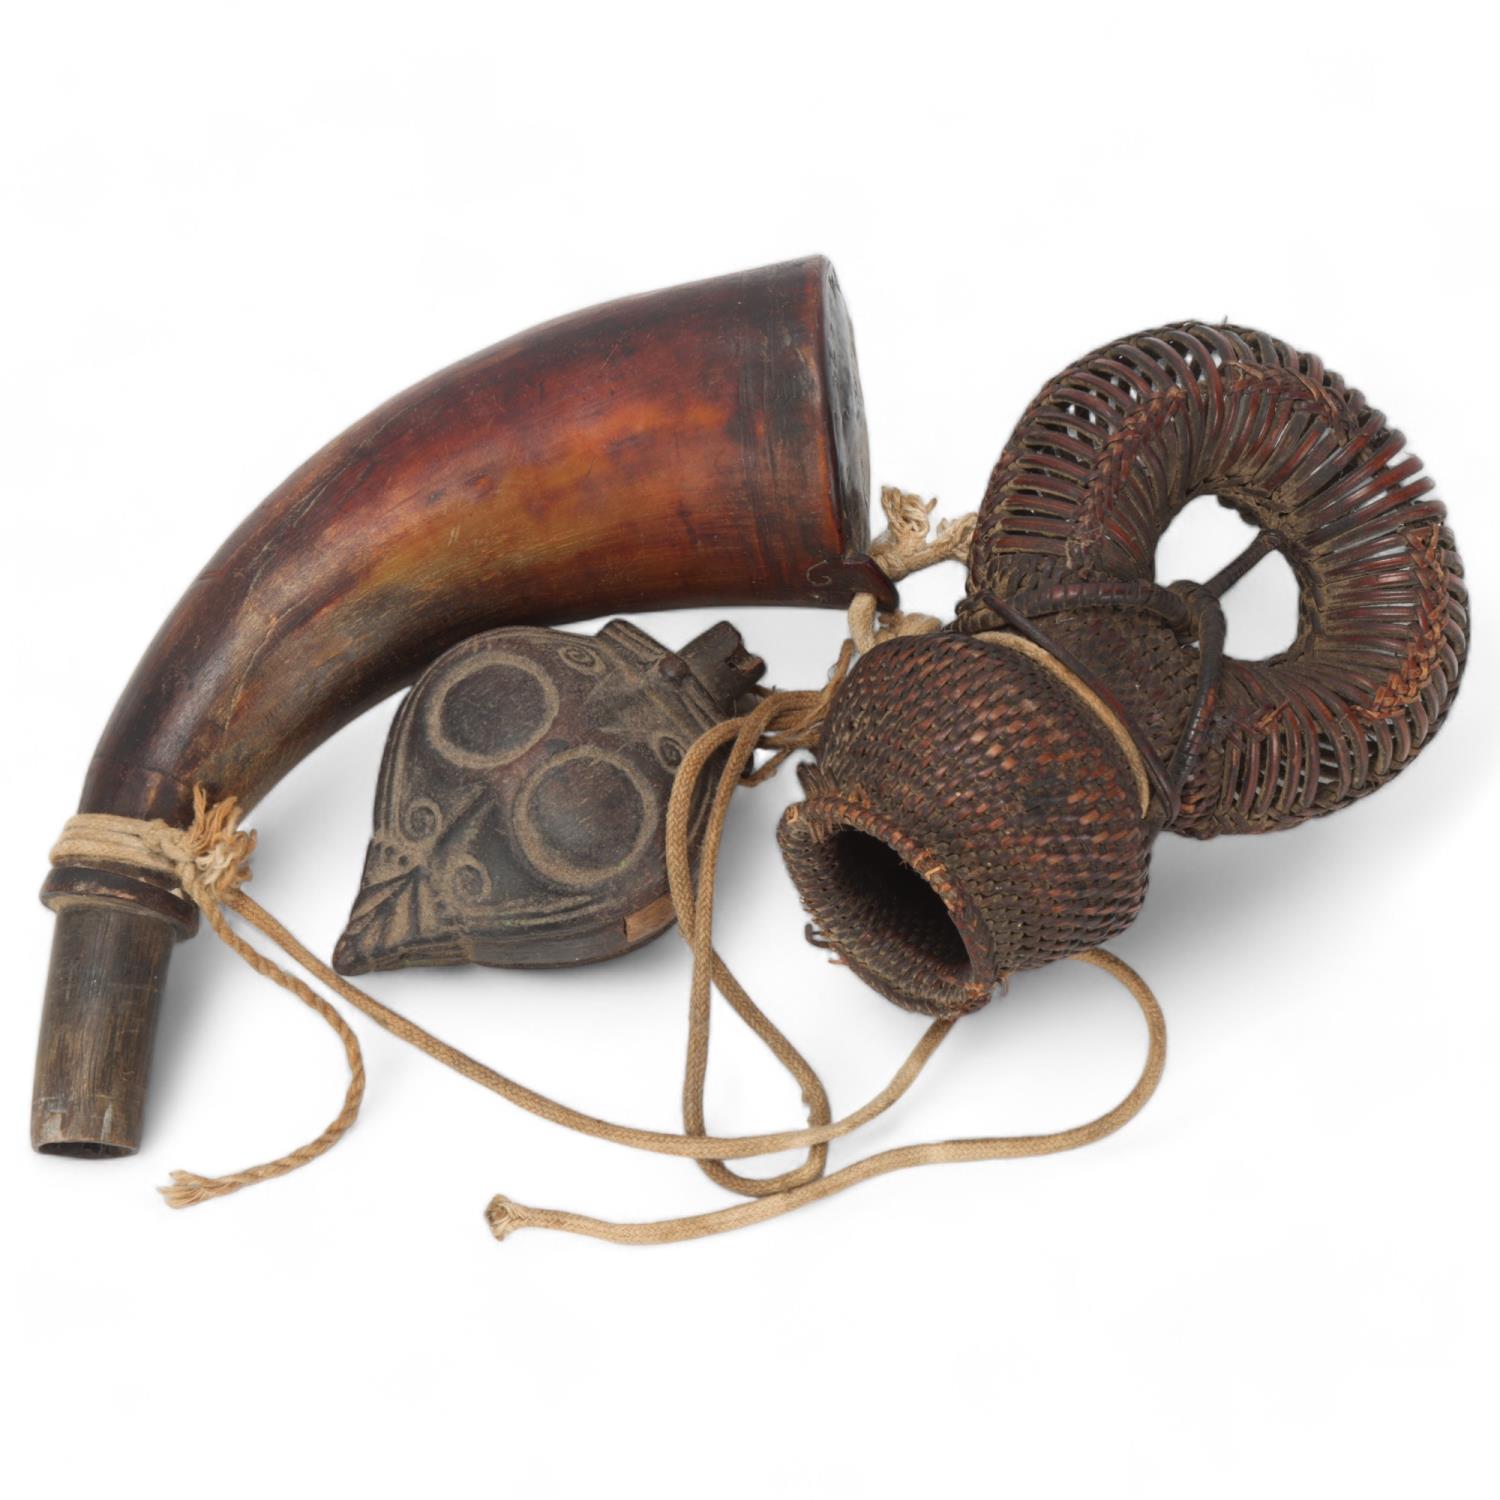 African Tribal powder horn, with finely woven basket and carved wood flask, all mount on a cord